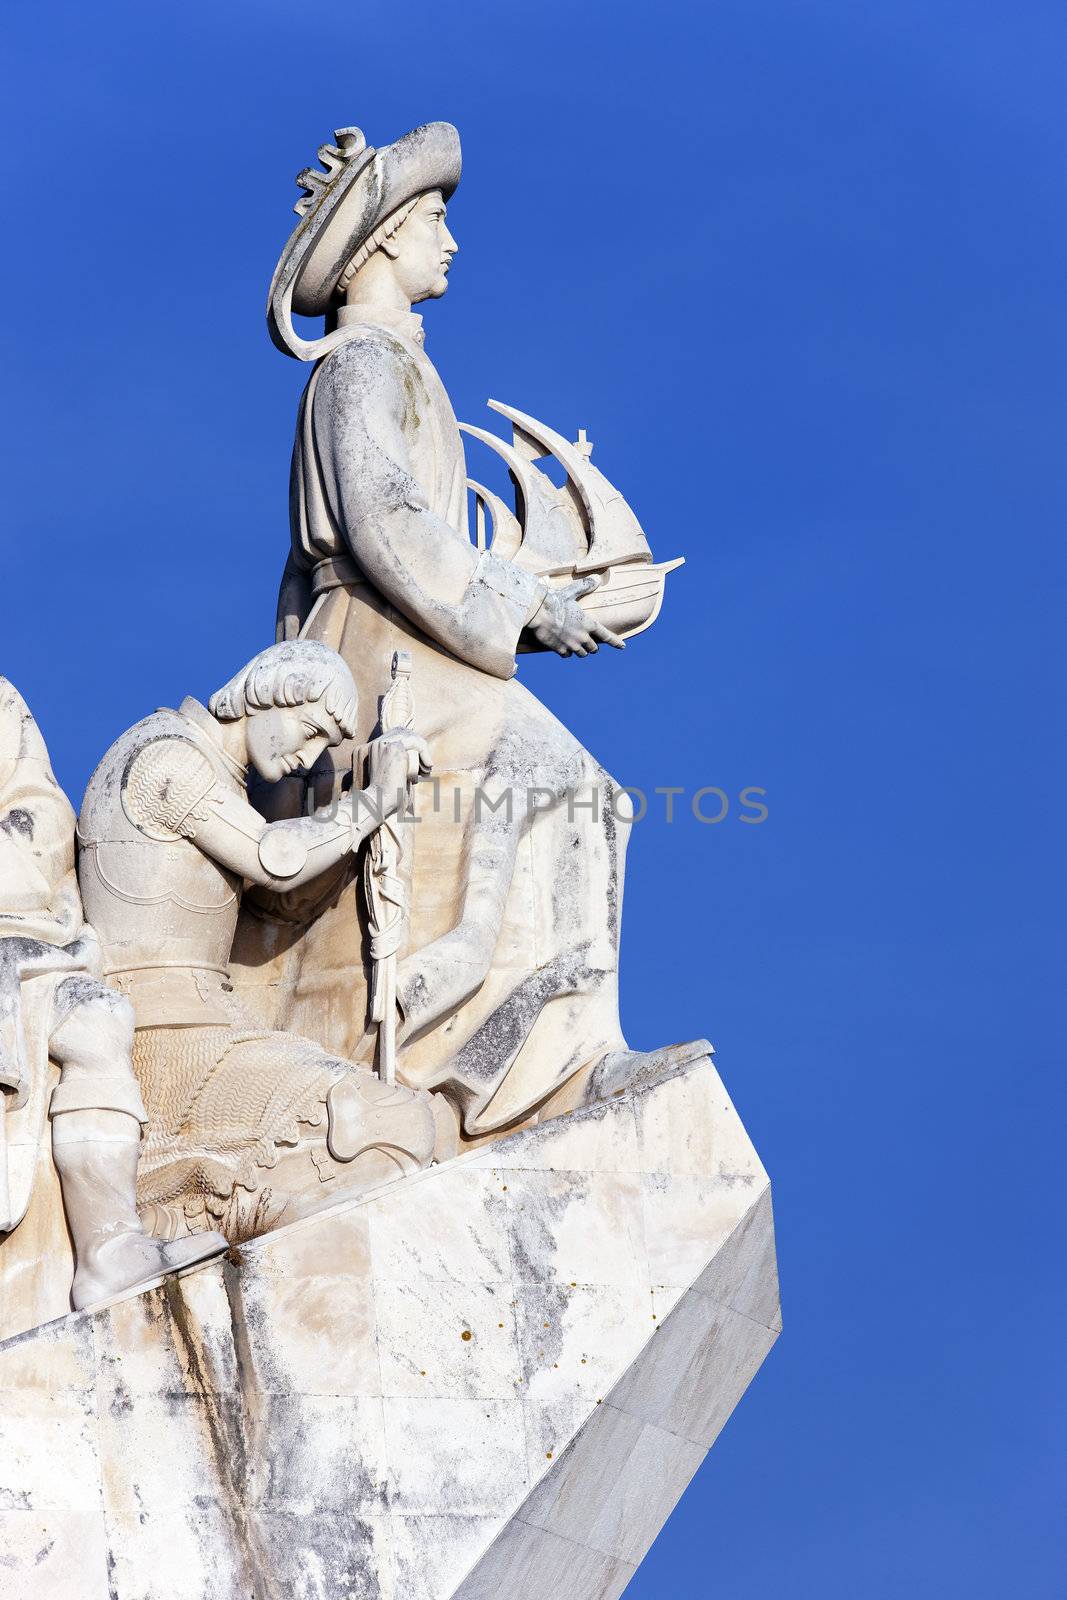 part of the Padrao dos Descobrimentos by vwalakte